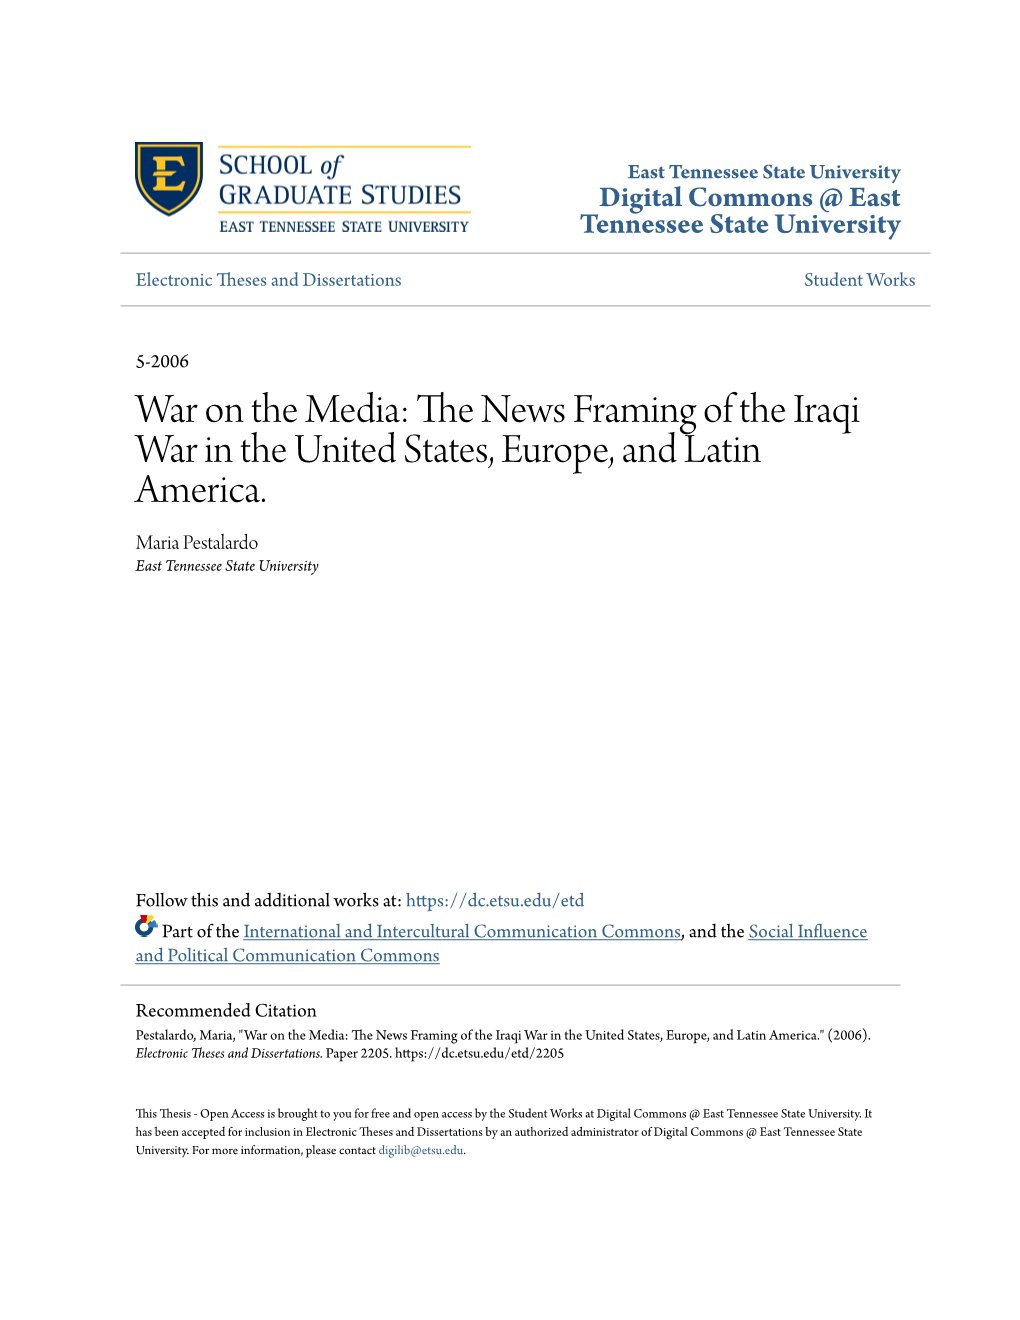 The News Framing of the Iraqi War in the United States, Europe, and Latin America